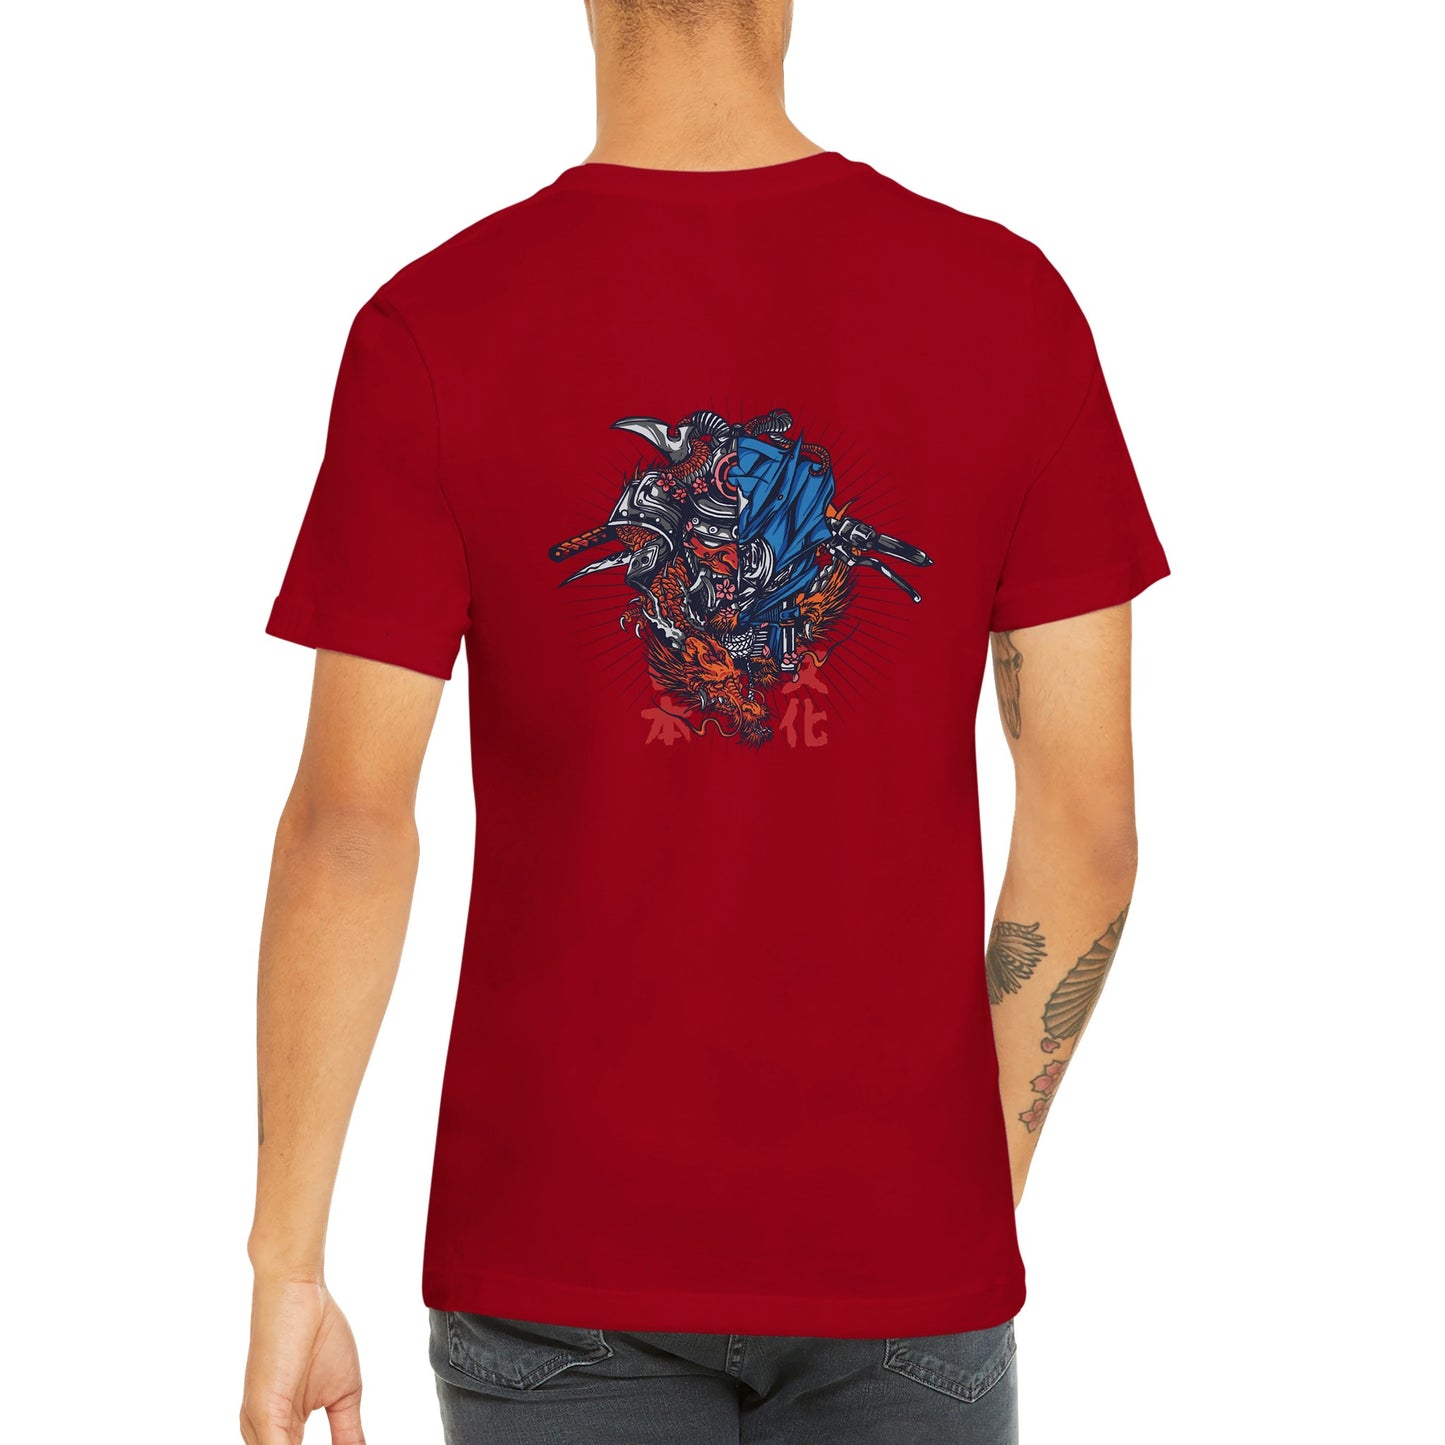 Oni Mask and Motorcycle T-shirt